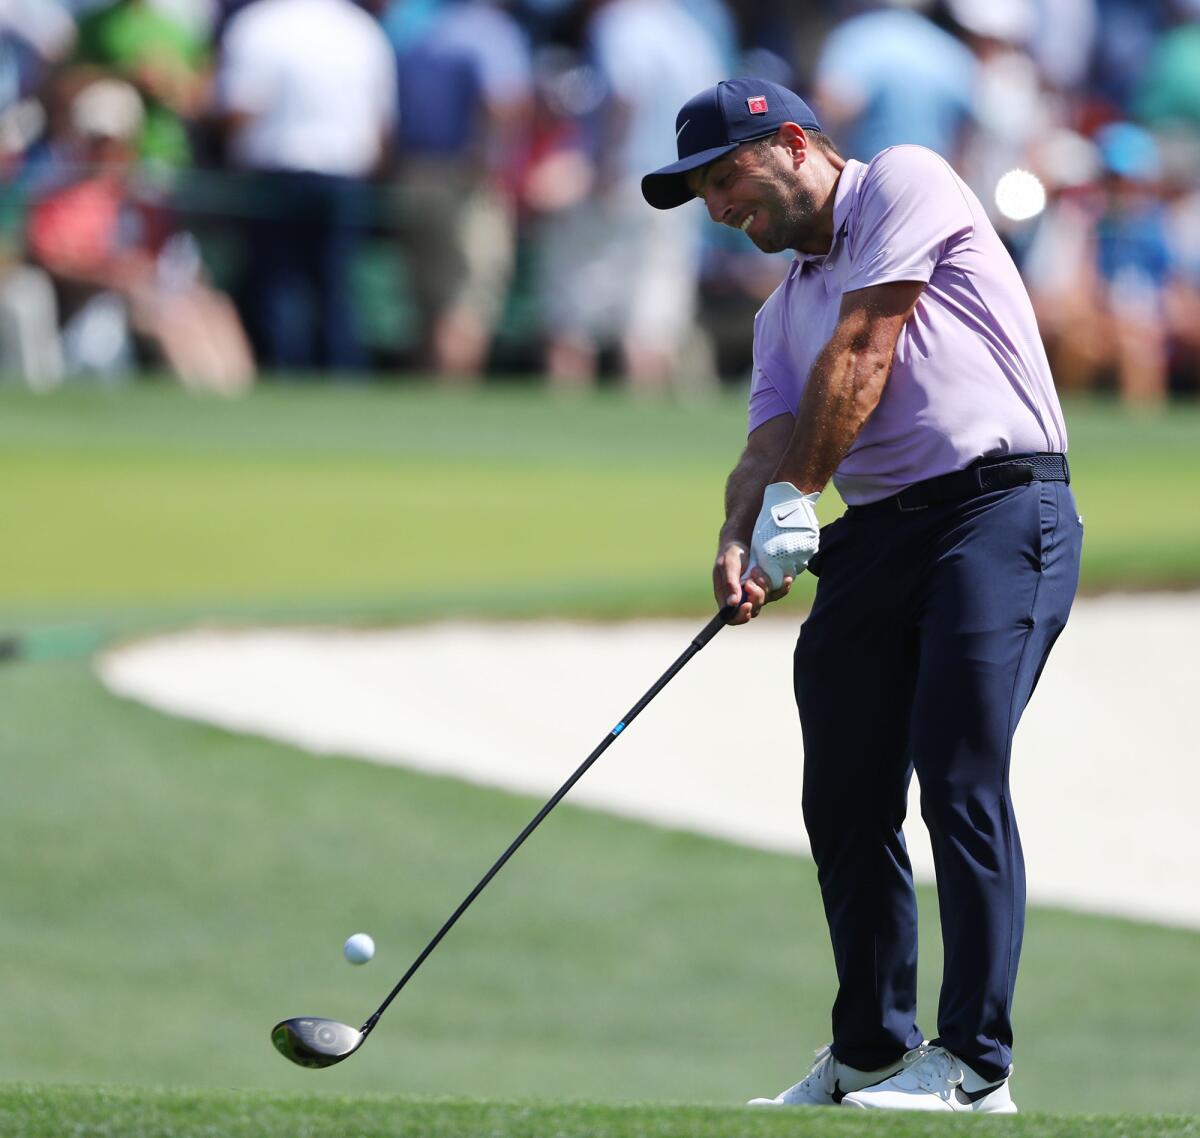 Francesco Molinari tees off on the 3rd hole during the third round of the Masters at Augusta National Golf Club in Augusta, Ga., on Saturday.